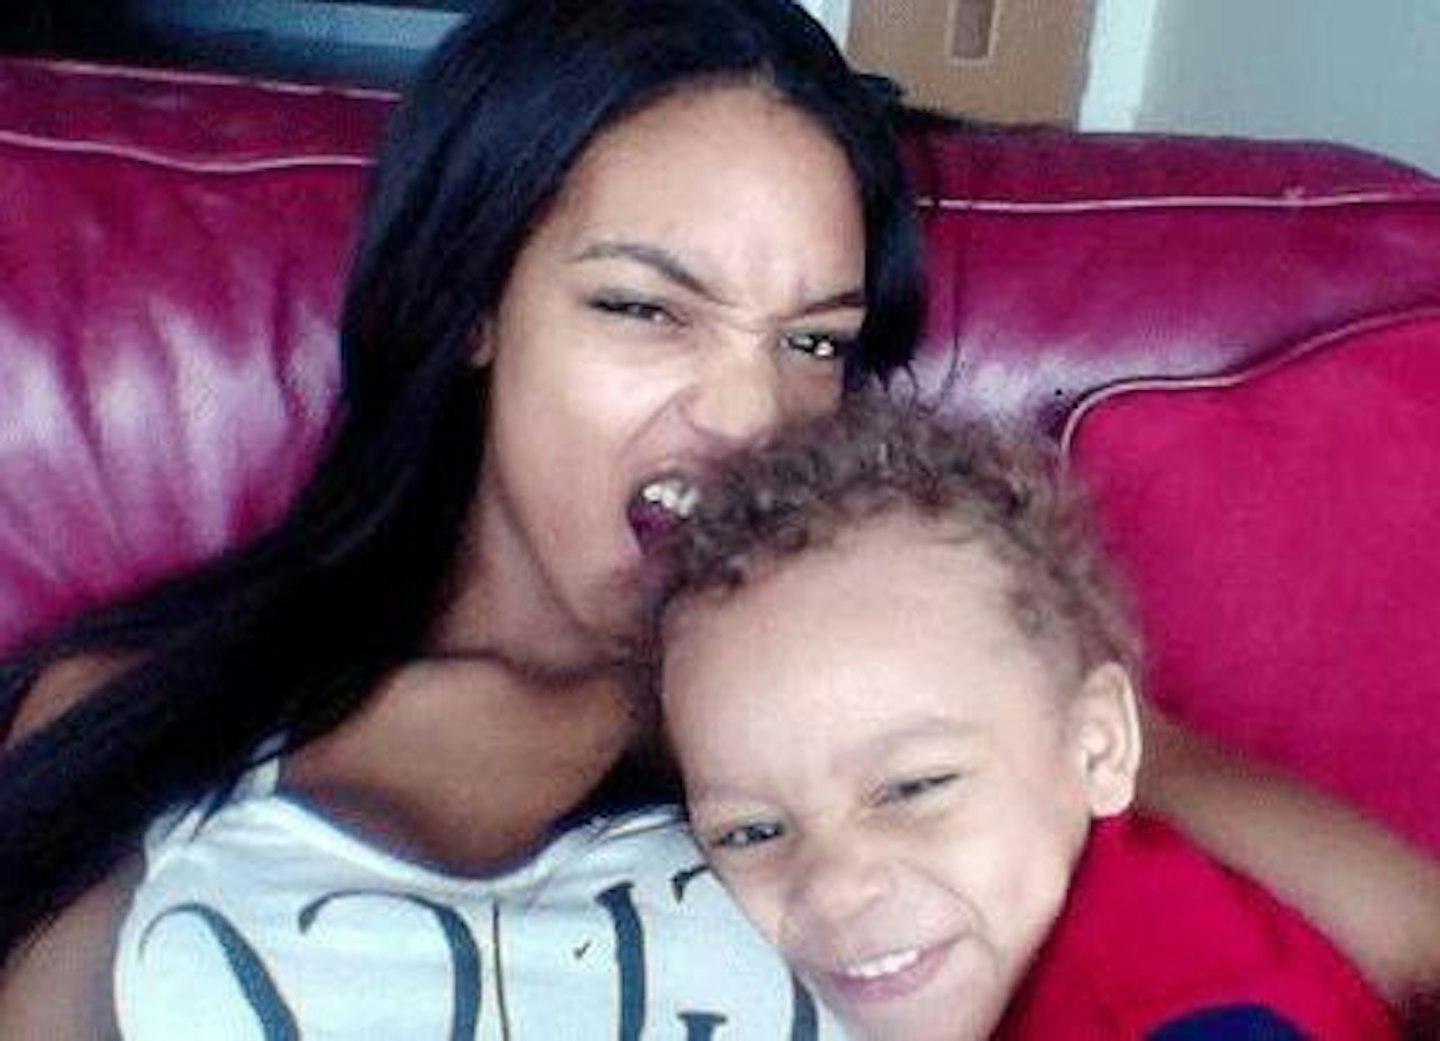 Jourdan with her son